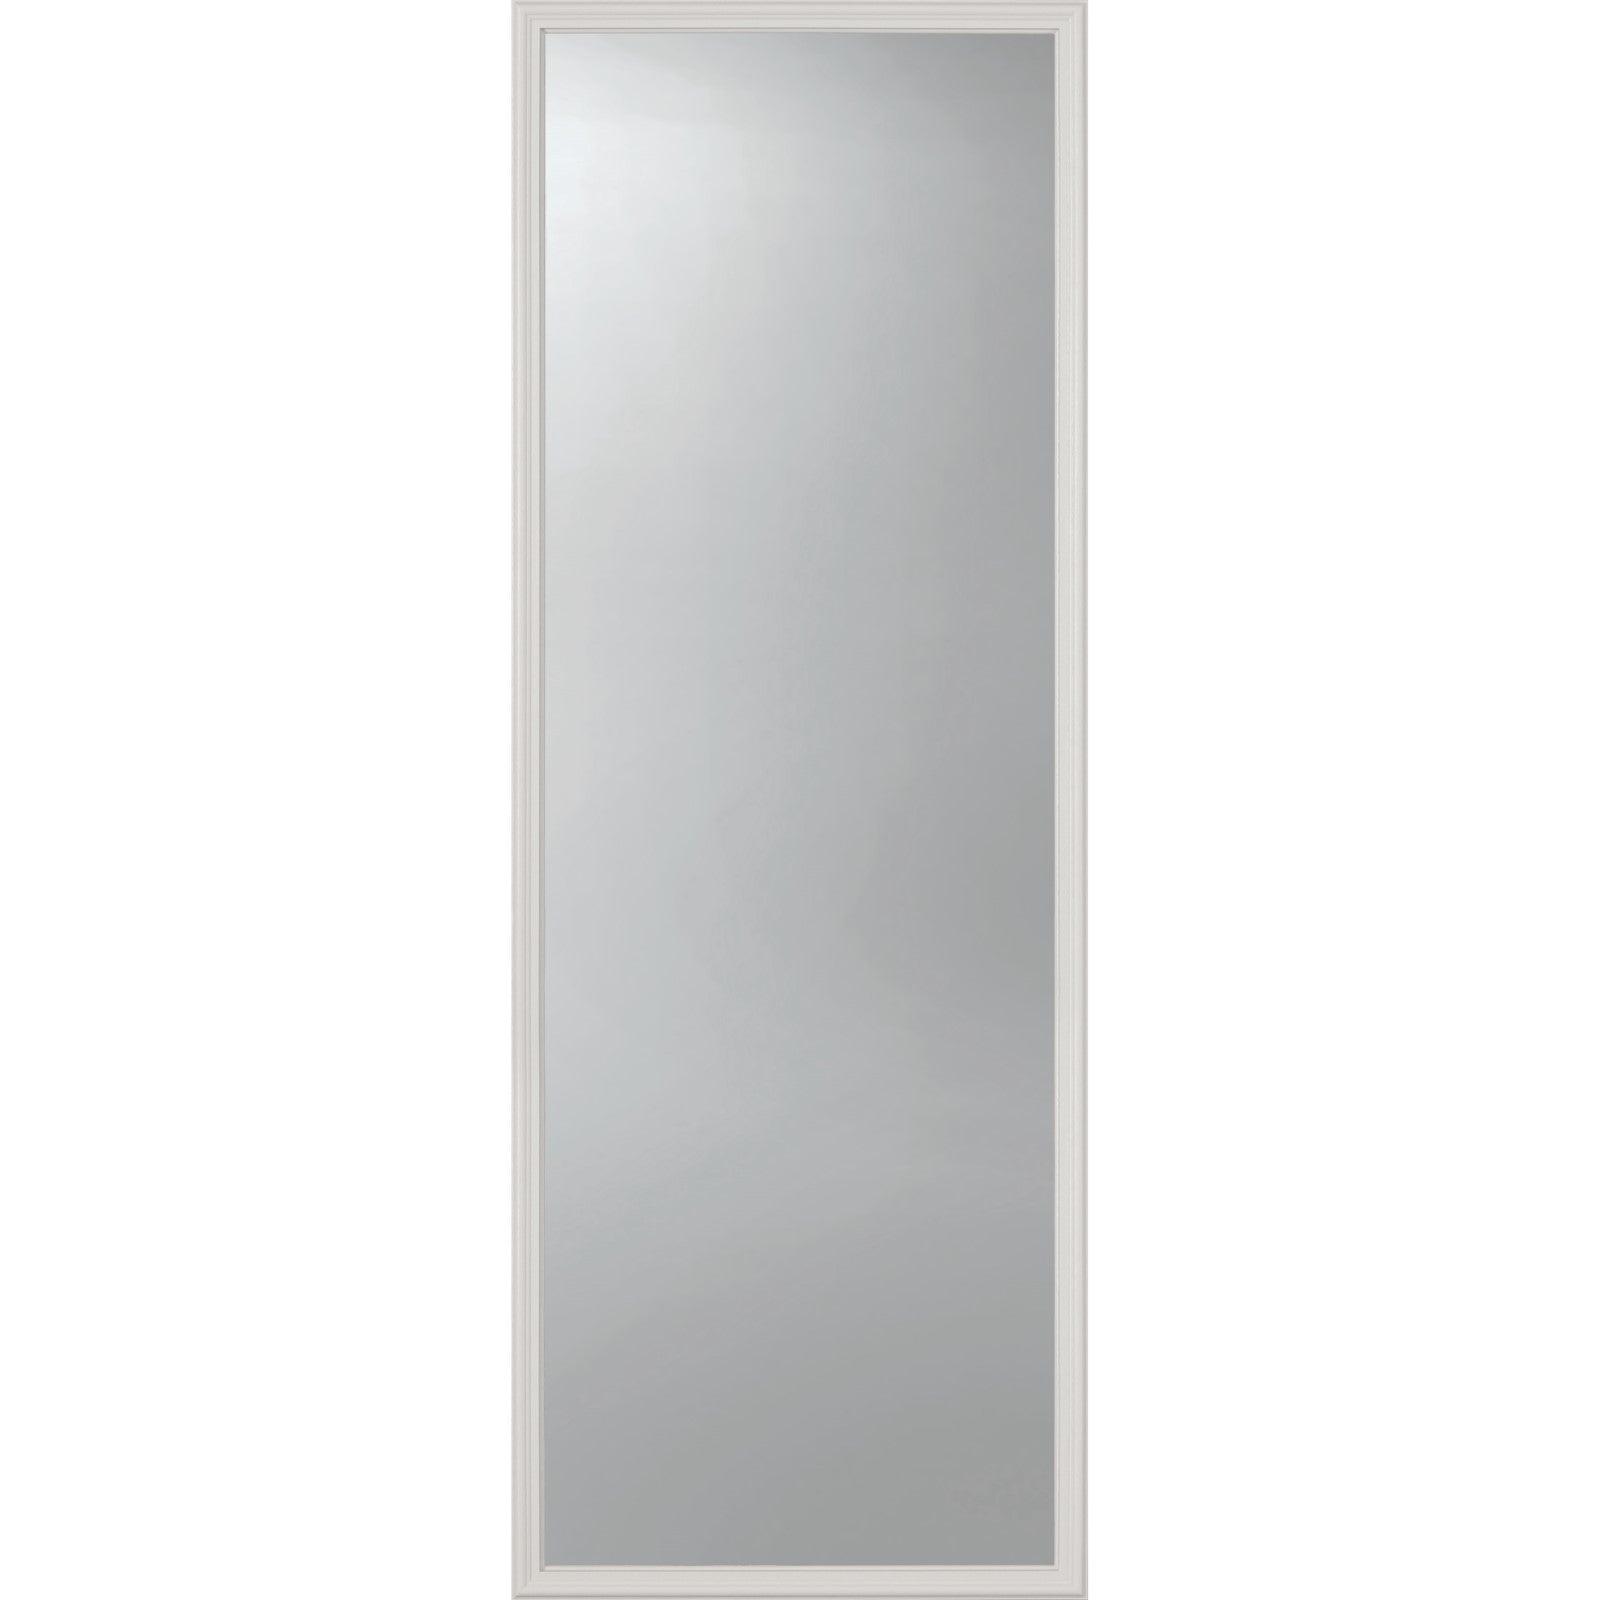 Clear 1 Lite Glass and Frame Kit (Full Lite) - Pease Doors: The Door Store